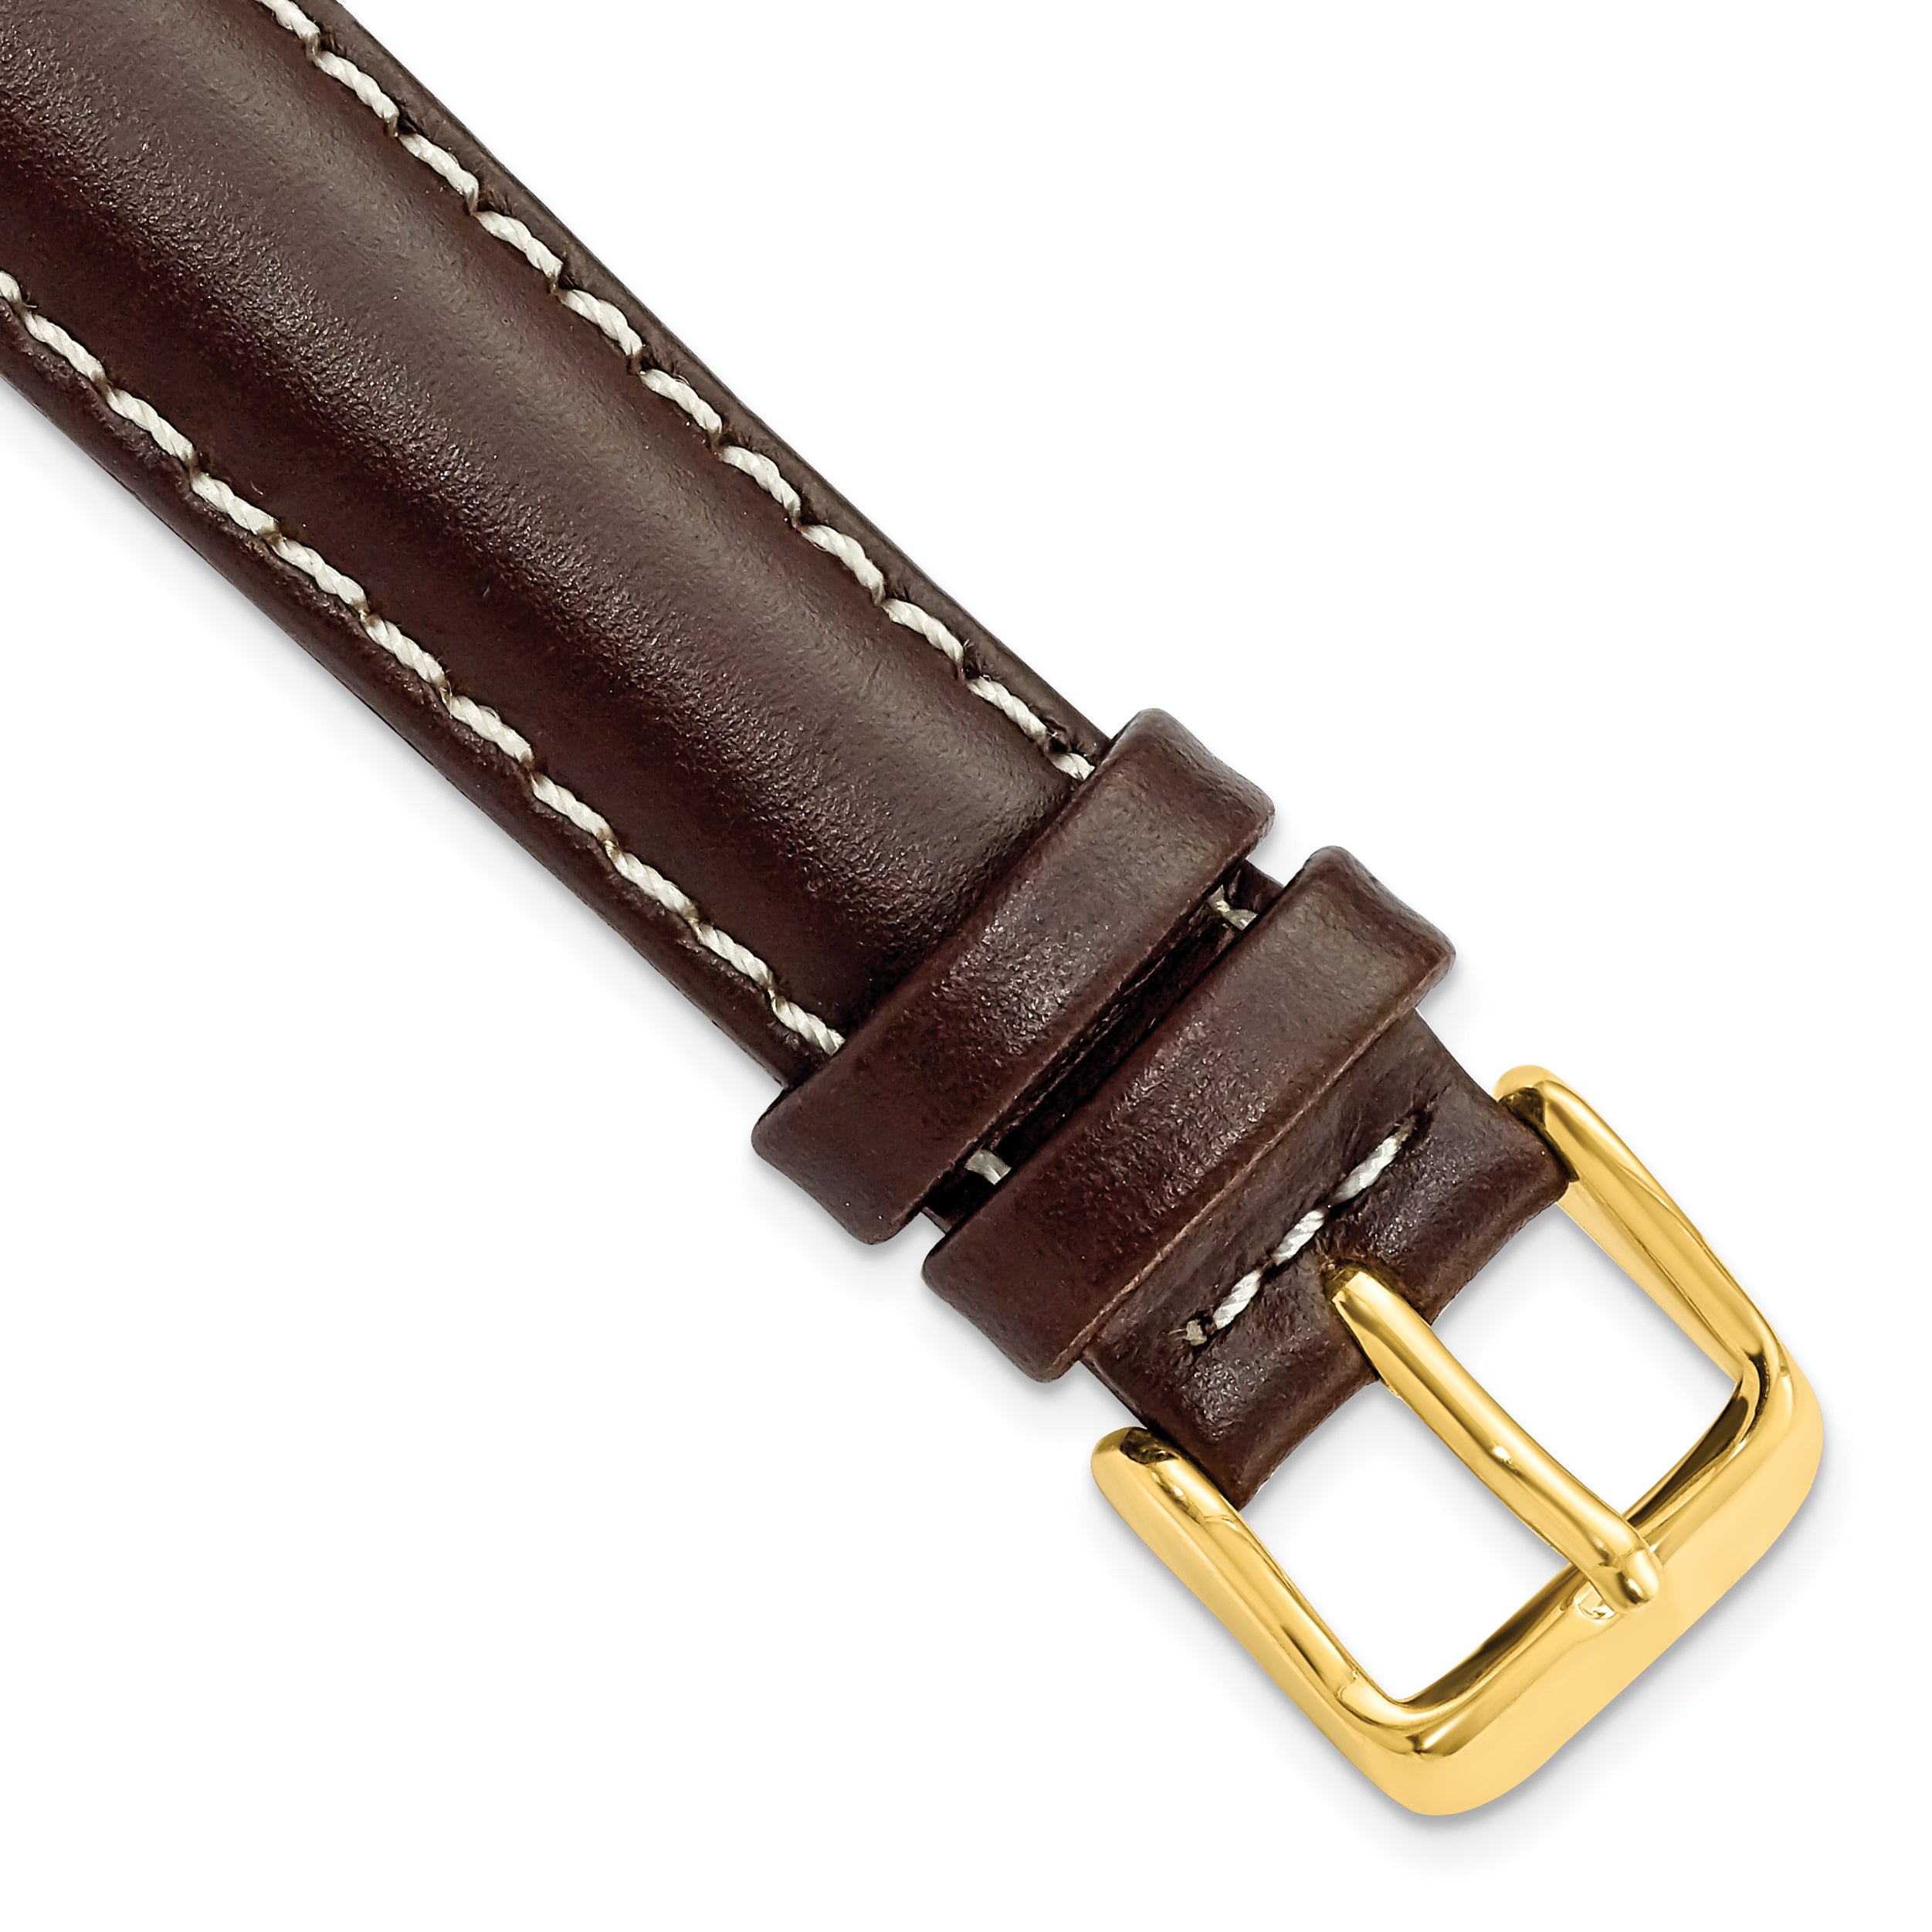 DeBeer 16mm Dark Brown Oil-tanned Leather with White Stitching and Gold-tone Buckle 7.5 inch Watch Band